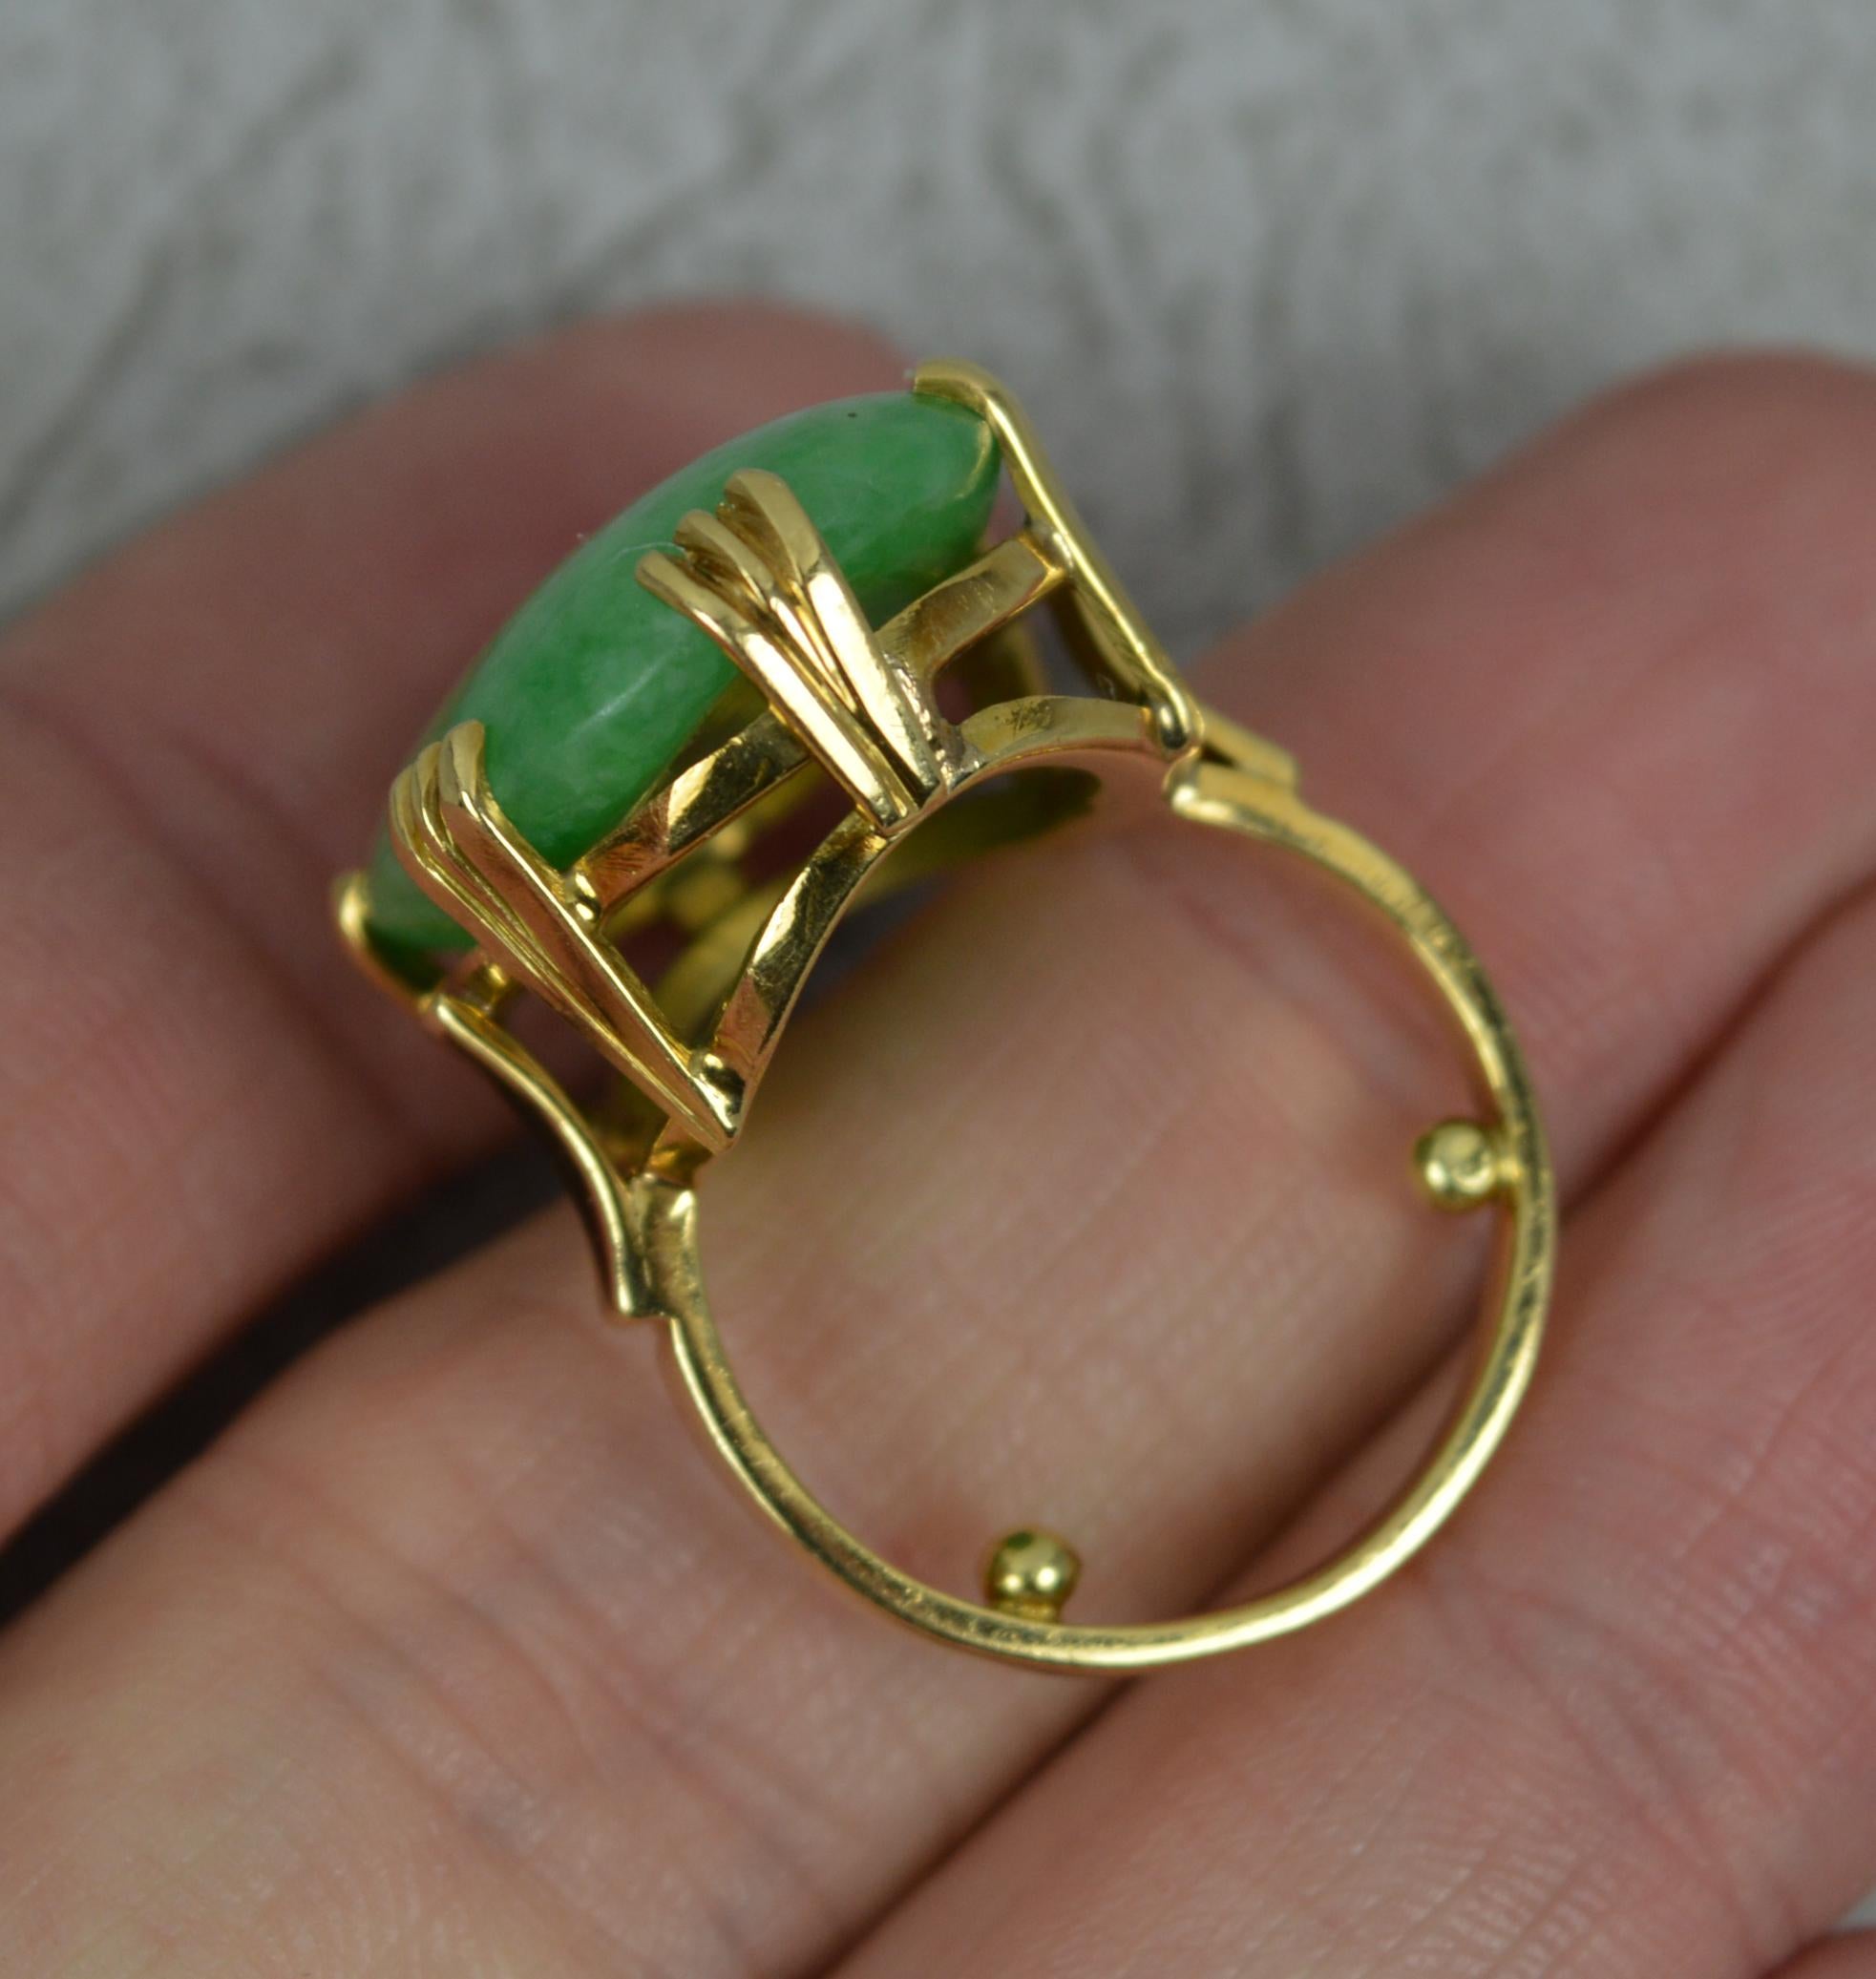 Superb 18 Carat Yellow Gold and Natural Jade Solitaire Ring In Excellent Condition For Sale In St Helens, GB